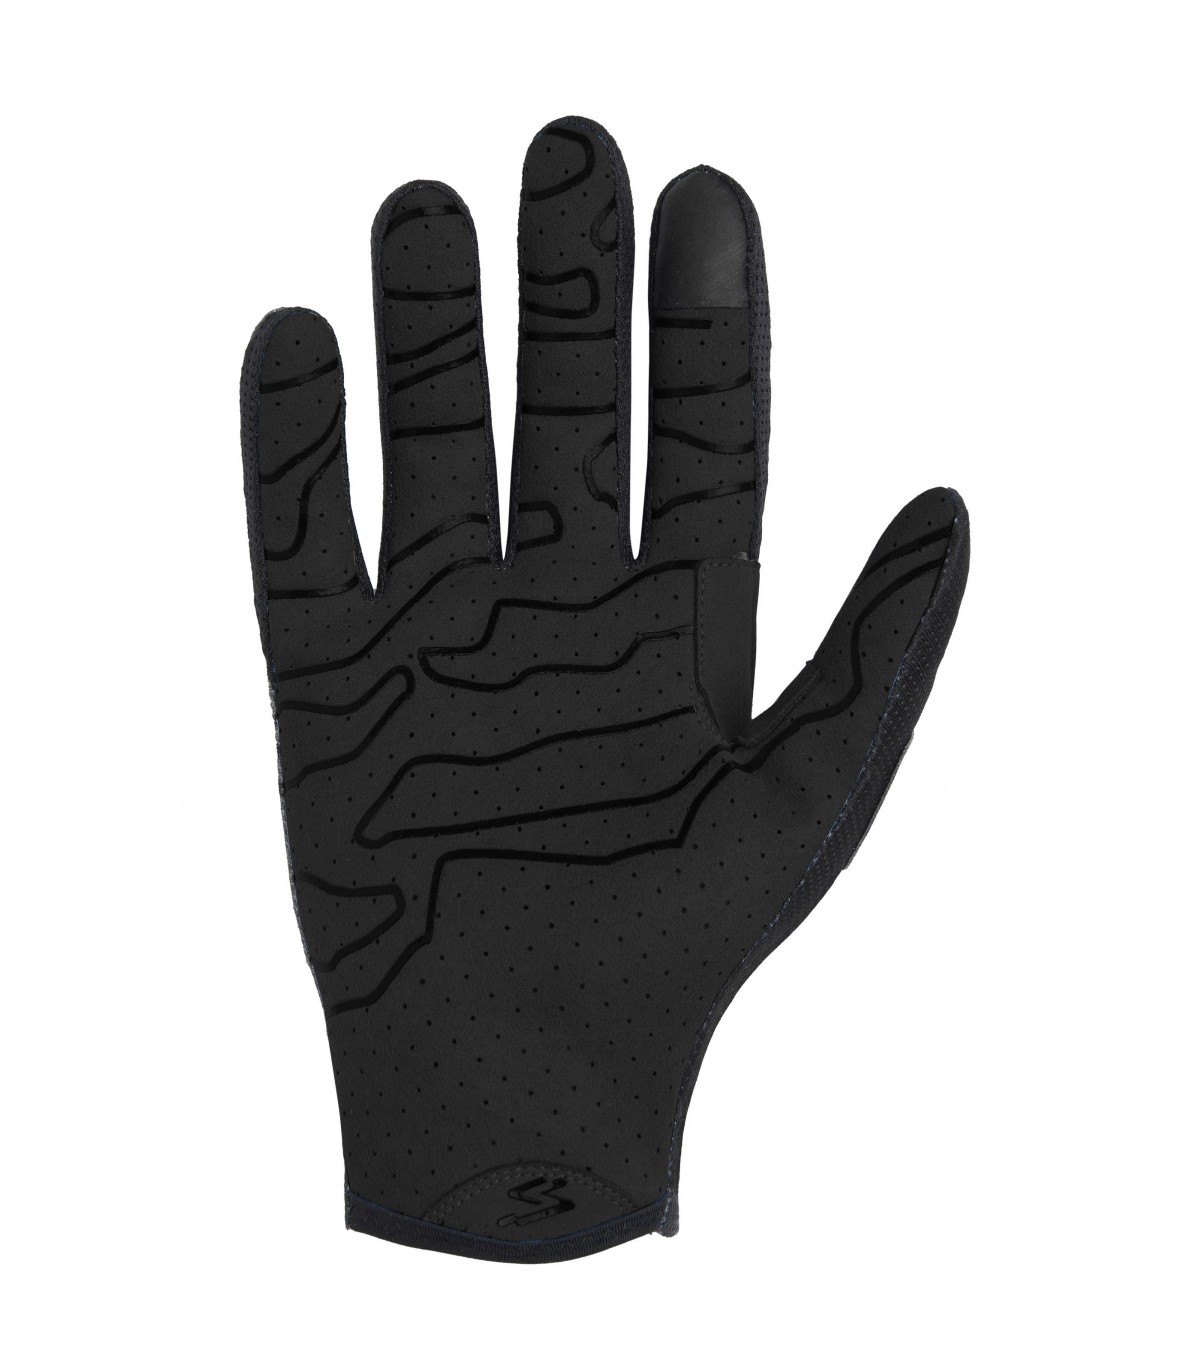 Details about   SPIUK Guante Largo Xp All Terrain Unisex BLACK GLALL20N Men’s Clothing Gloves 